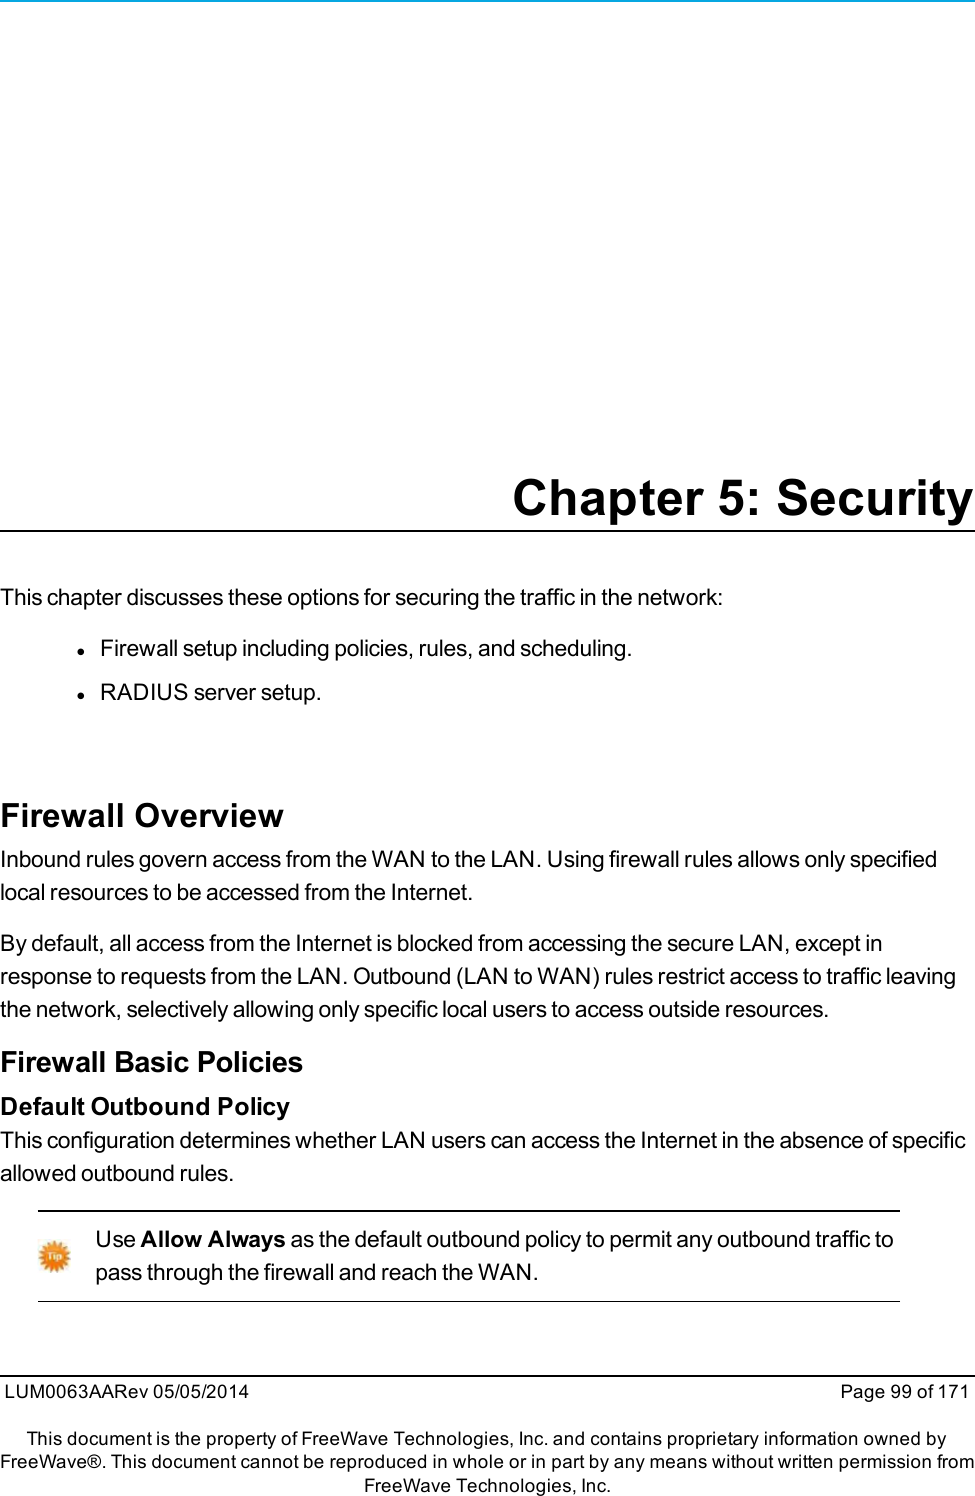 Chapter 5: SecurityThis chapter discusses these options for securing the traffic in the network:lFirewall setup including policies, rules, and scheduling.lRADIUS server setup.Firewall OverviewInbound rules govern access from the WAN to the LAN. Using firewall rules allows only specifiedlocal resources to be accessed from the Internet.By default, all access from the Internet is blocked from accessing the secure LAN, except inresponse to requests from the LAN. Outbound (LAN to WAN) rules restrict access to traffic leavingthe network, selectively allowing only specific local users to access outside resources.Firewall Basic PoliciesDefault Outbound PolicyThis configuration determines whether LAN users can access the Internet in the absence of specificallowed outbound rules.Use Allow Always as the default outbound policy to permit any outbound traffic topass through the firewall and reach the WAN.LUM0063AARev 05/05/2014 Page 99 of 171This document is the property of FreeWave Technologies, Inc. and contains proprietary information owned byFreeWave®. This document cannot be reproduced in whole or in part by any means without written permission fromFreeWave Technologies, Inc.